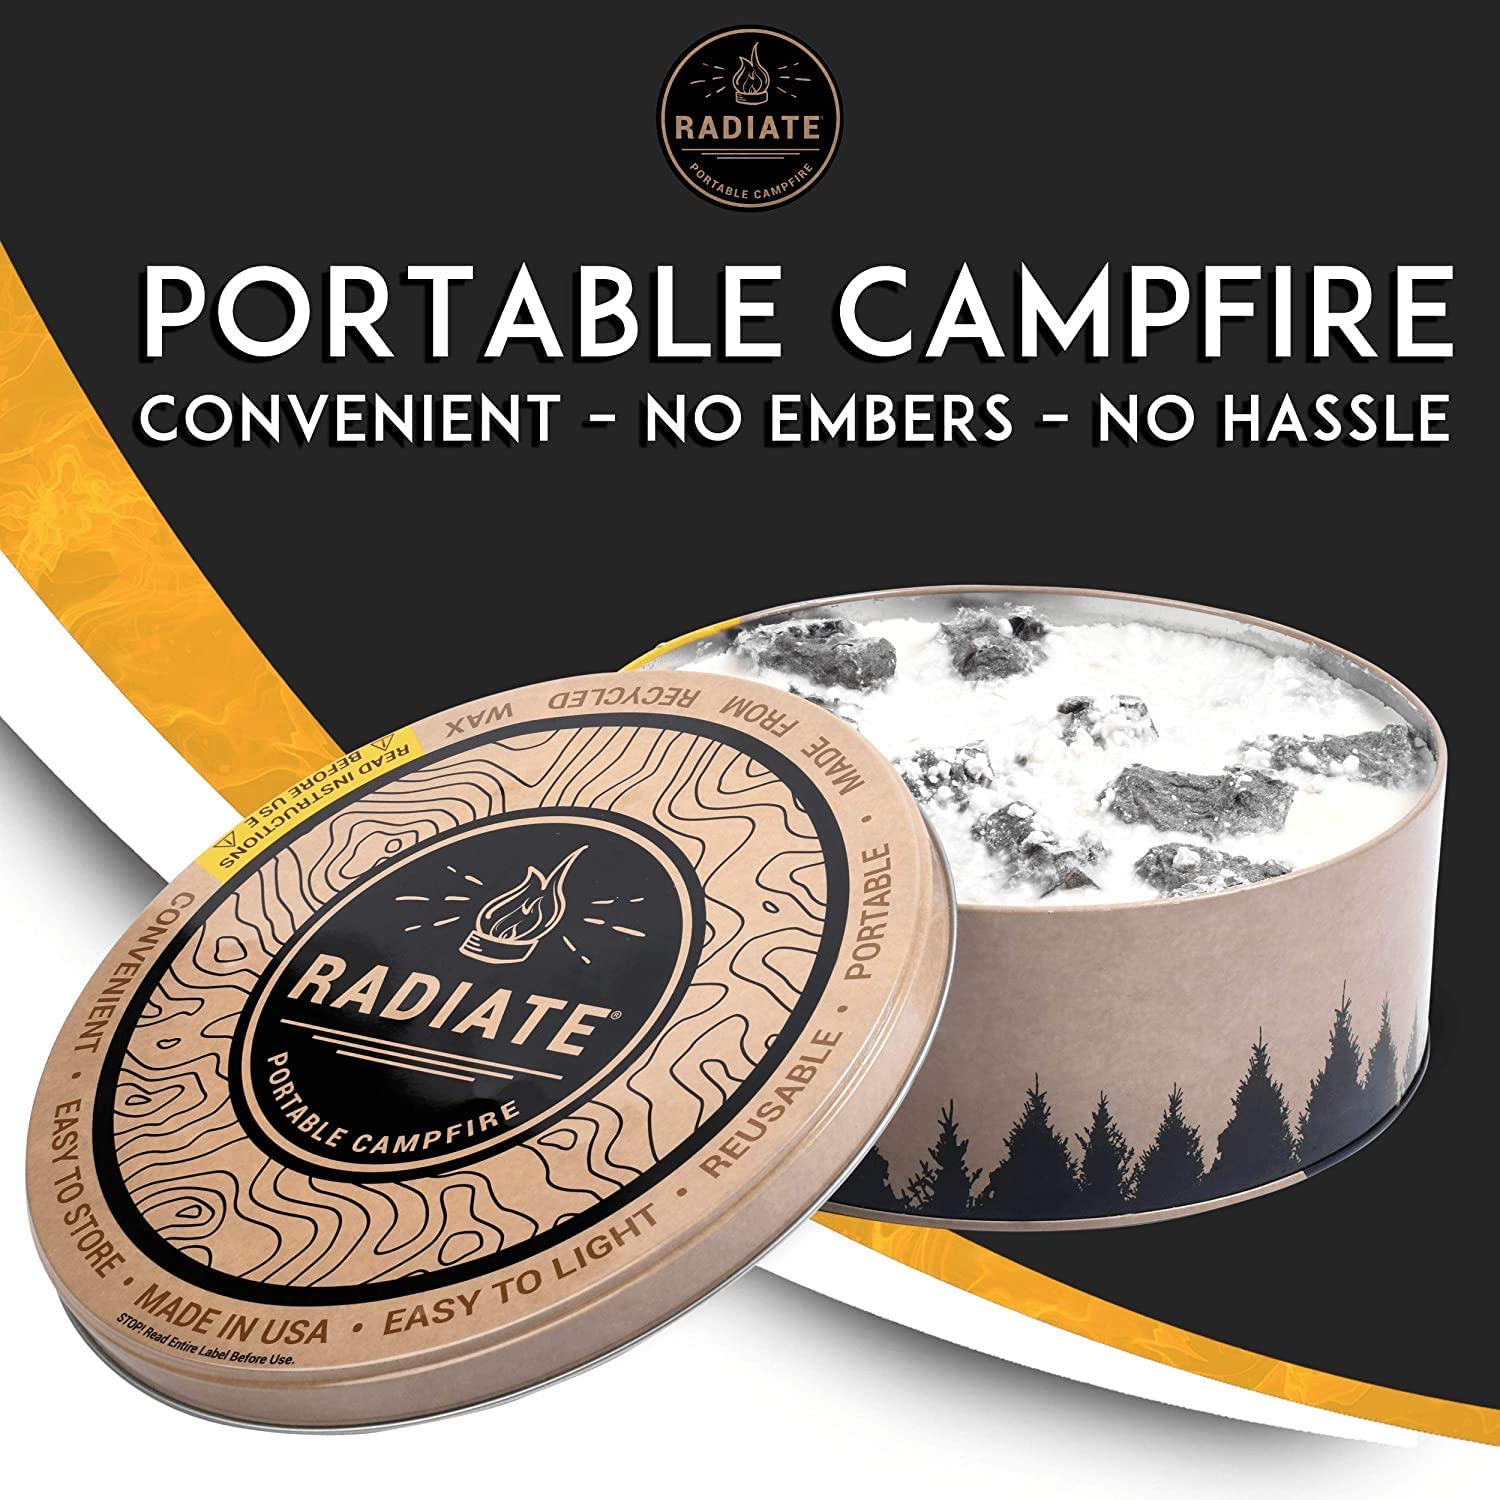 Radiate Portable Campfire: The Original Go-Anywhere Campfire | Lightweight and Portable | 3-5 Hours of Bright and Warm Burn Time | Convenient-No Embers-No Hassle | Made in USA | Original 1 Pack - image 2 of 7